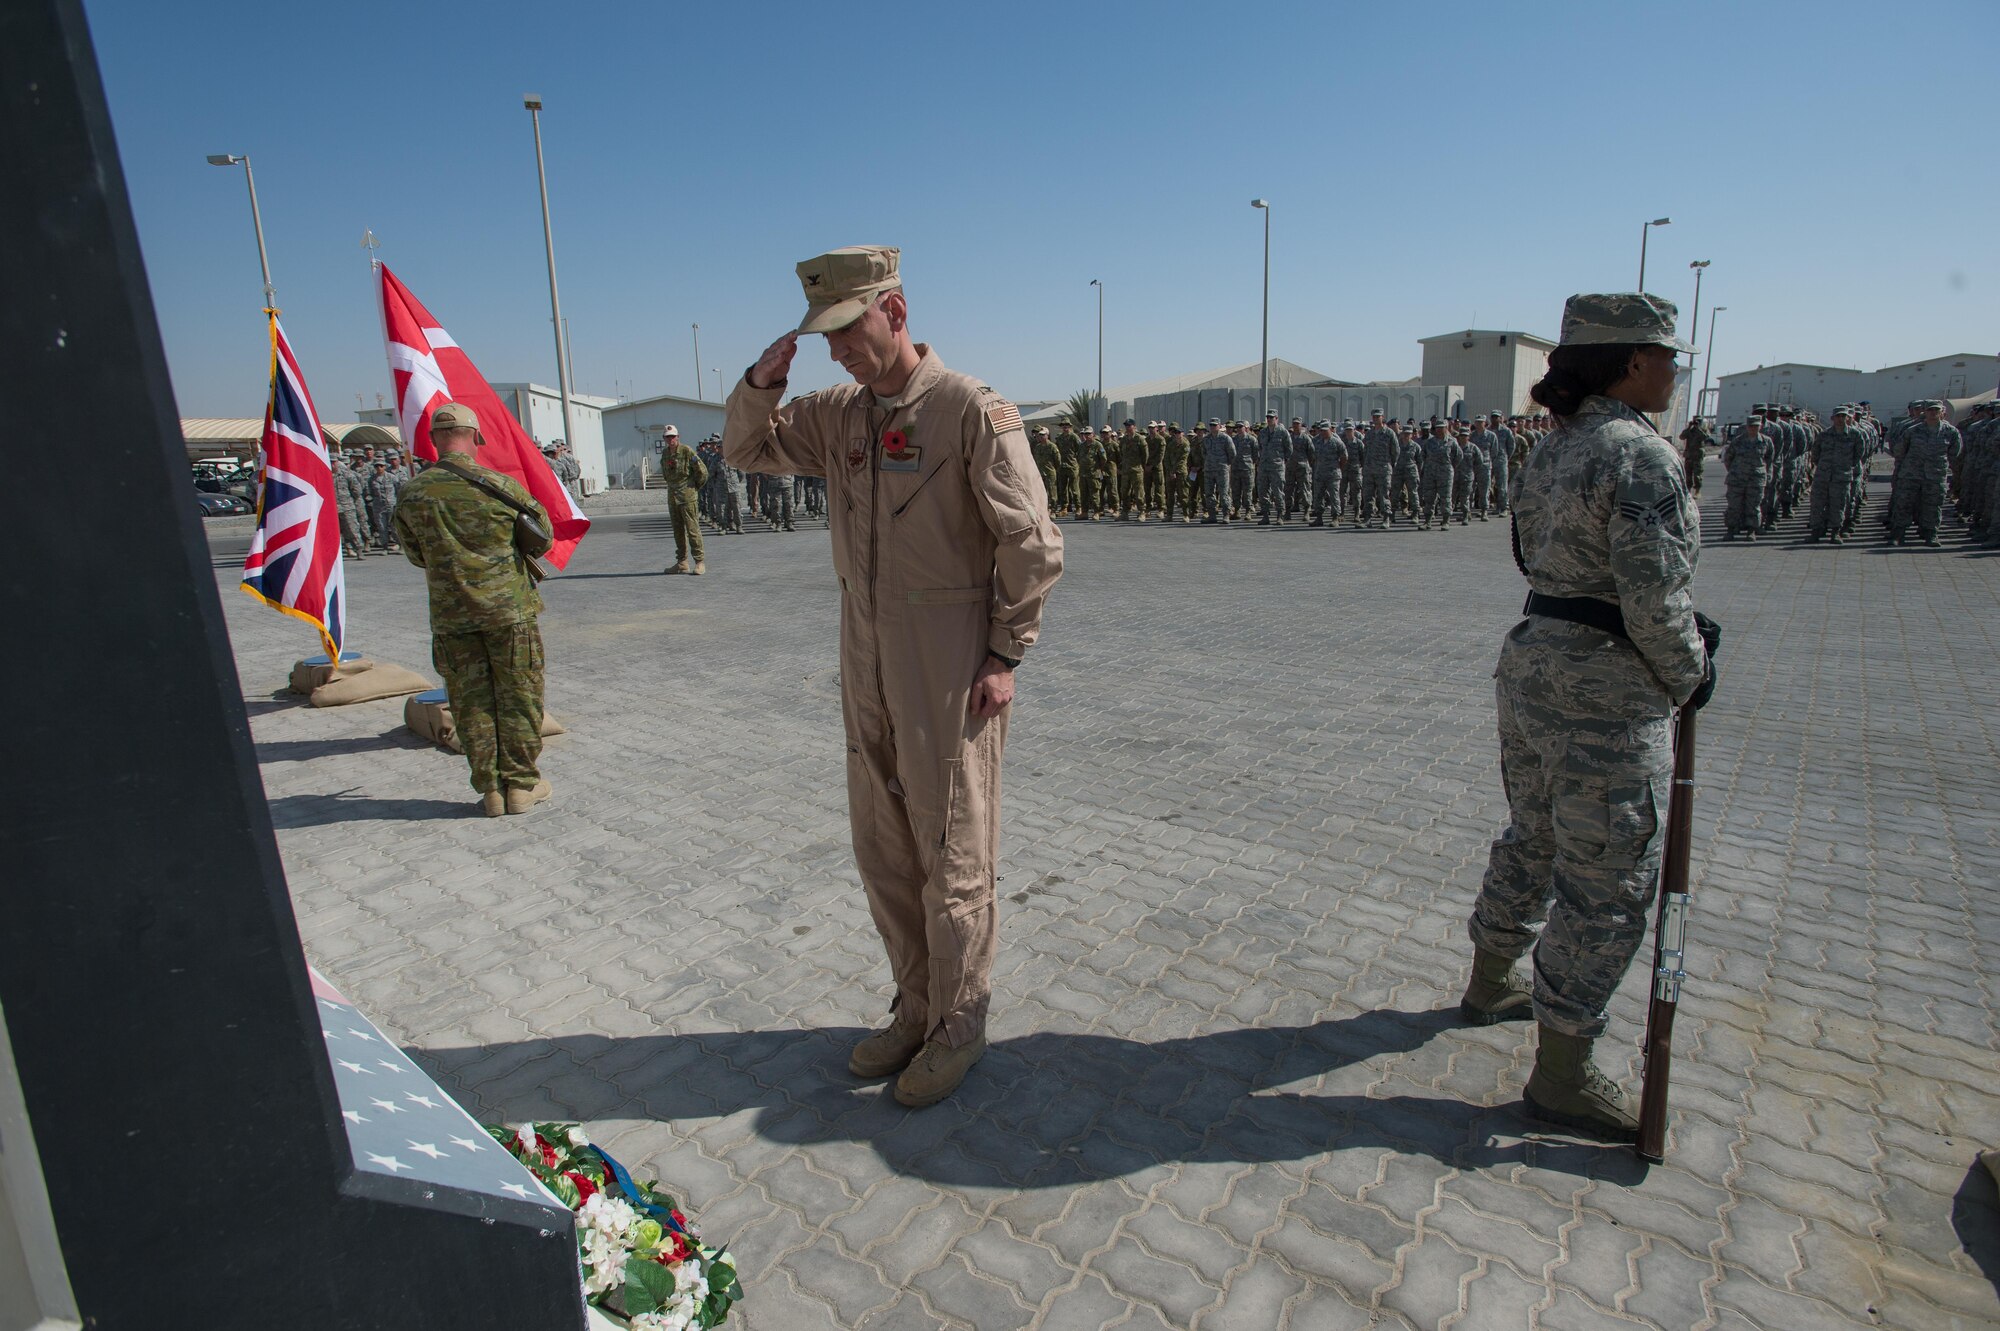 Col. Kevin, 380 Air Expeditionary Wing vice commander, honors the lives of fallen service members during a Coalition Veteran’s Day ceremony on Nov. 11, 2016 at an undisclosed location in Southwest Asia. After the laying of wreaths, a Royal Australian Air Force chaplain led service members in a reciting of The Ode, a segment of a poem written by Laurence Binyon in 1914. (U.S. Air Force photo by Senior Airman Tyler Woodward)
